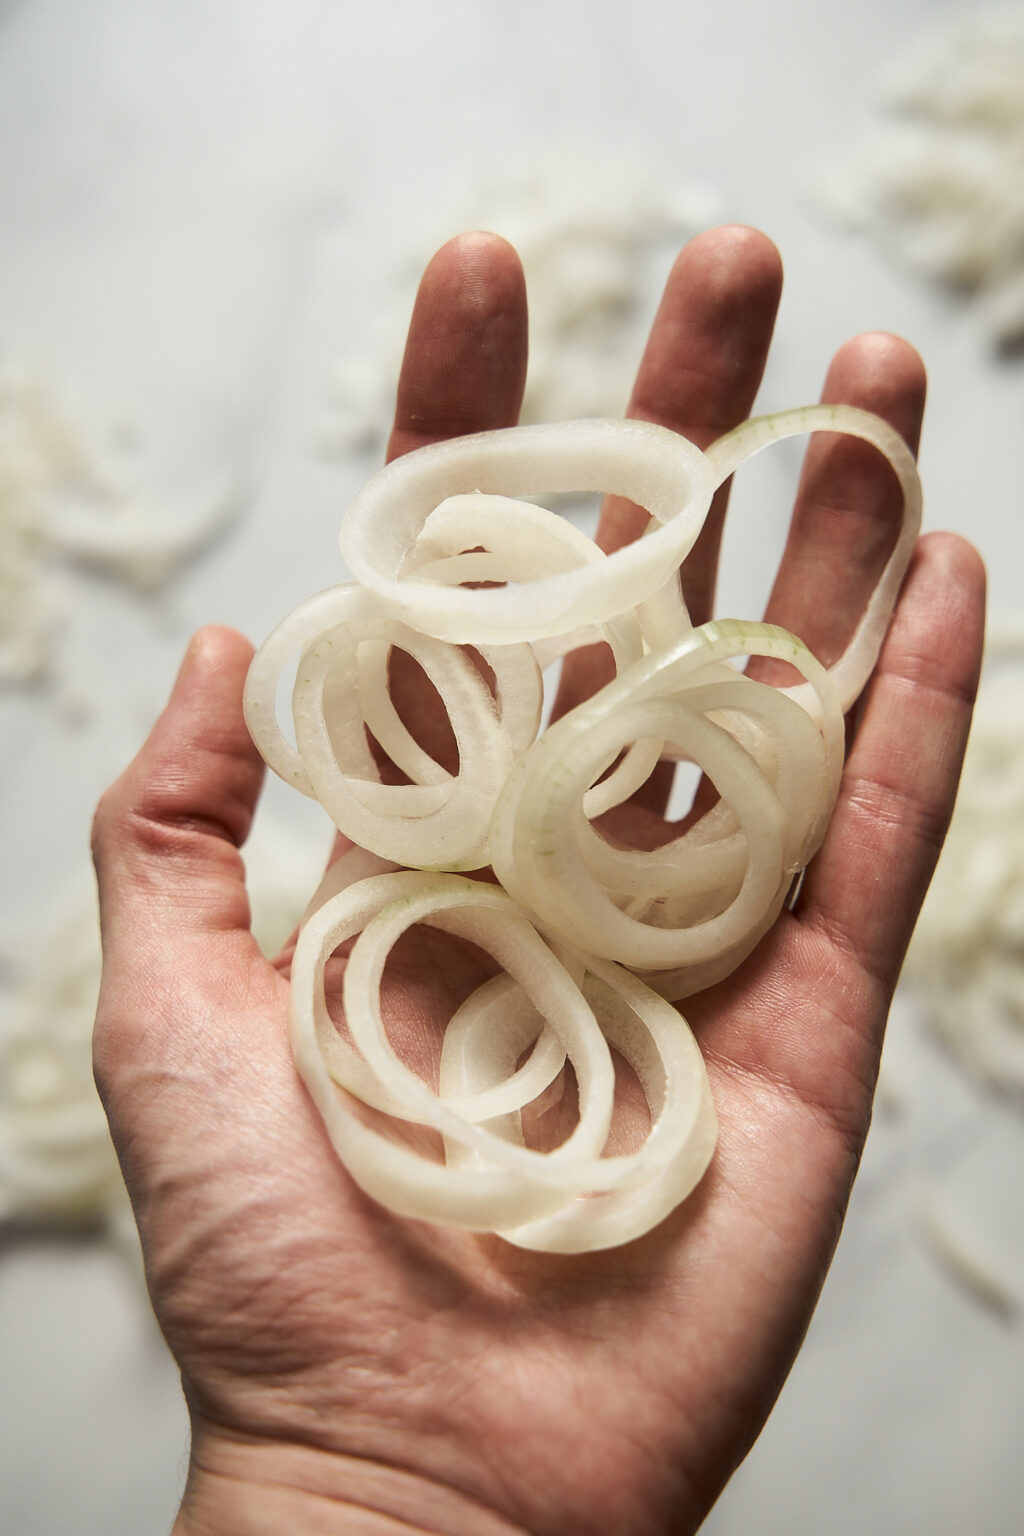 Onion sliced in Rings in the hand